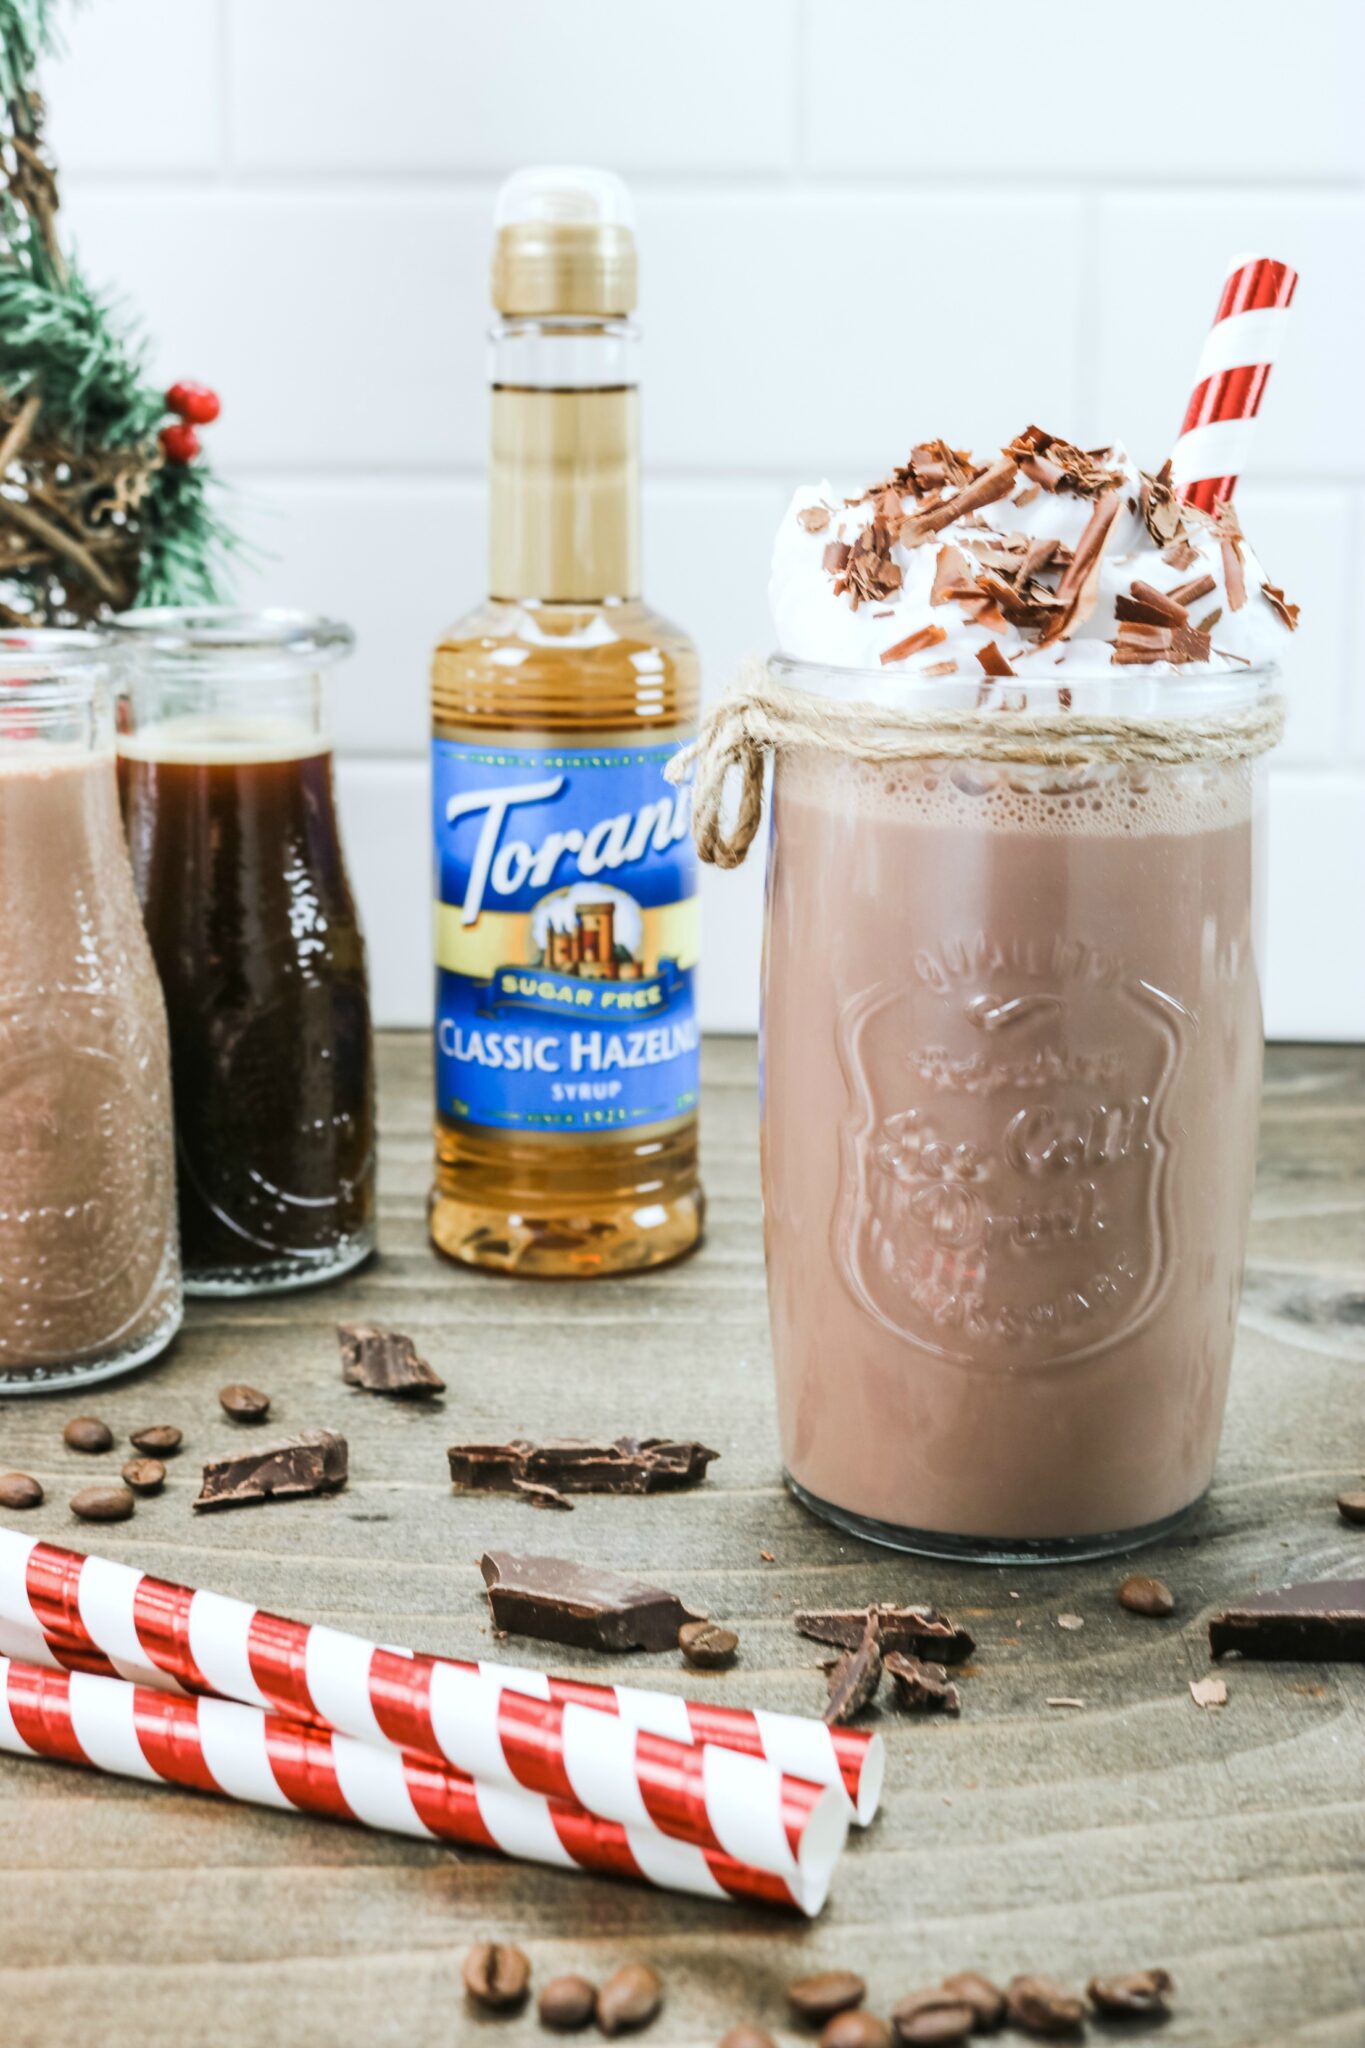 A close up of the Hazelnut Protein Iced Mocha with the Torani Classic Hazelnut Sugar Free syrup, coffe, protein shake, and chocolate are shown in the background.